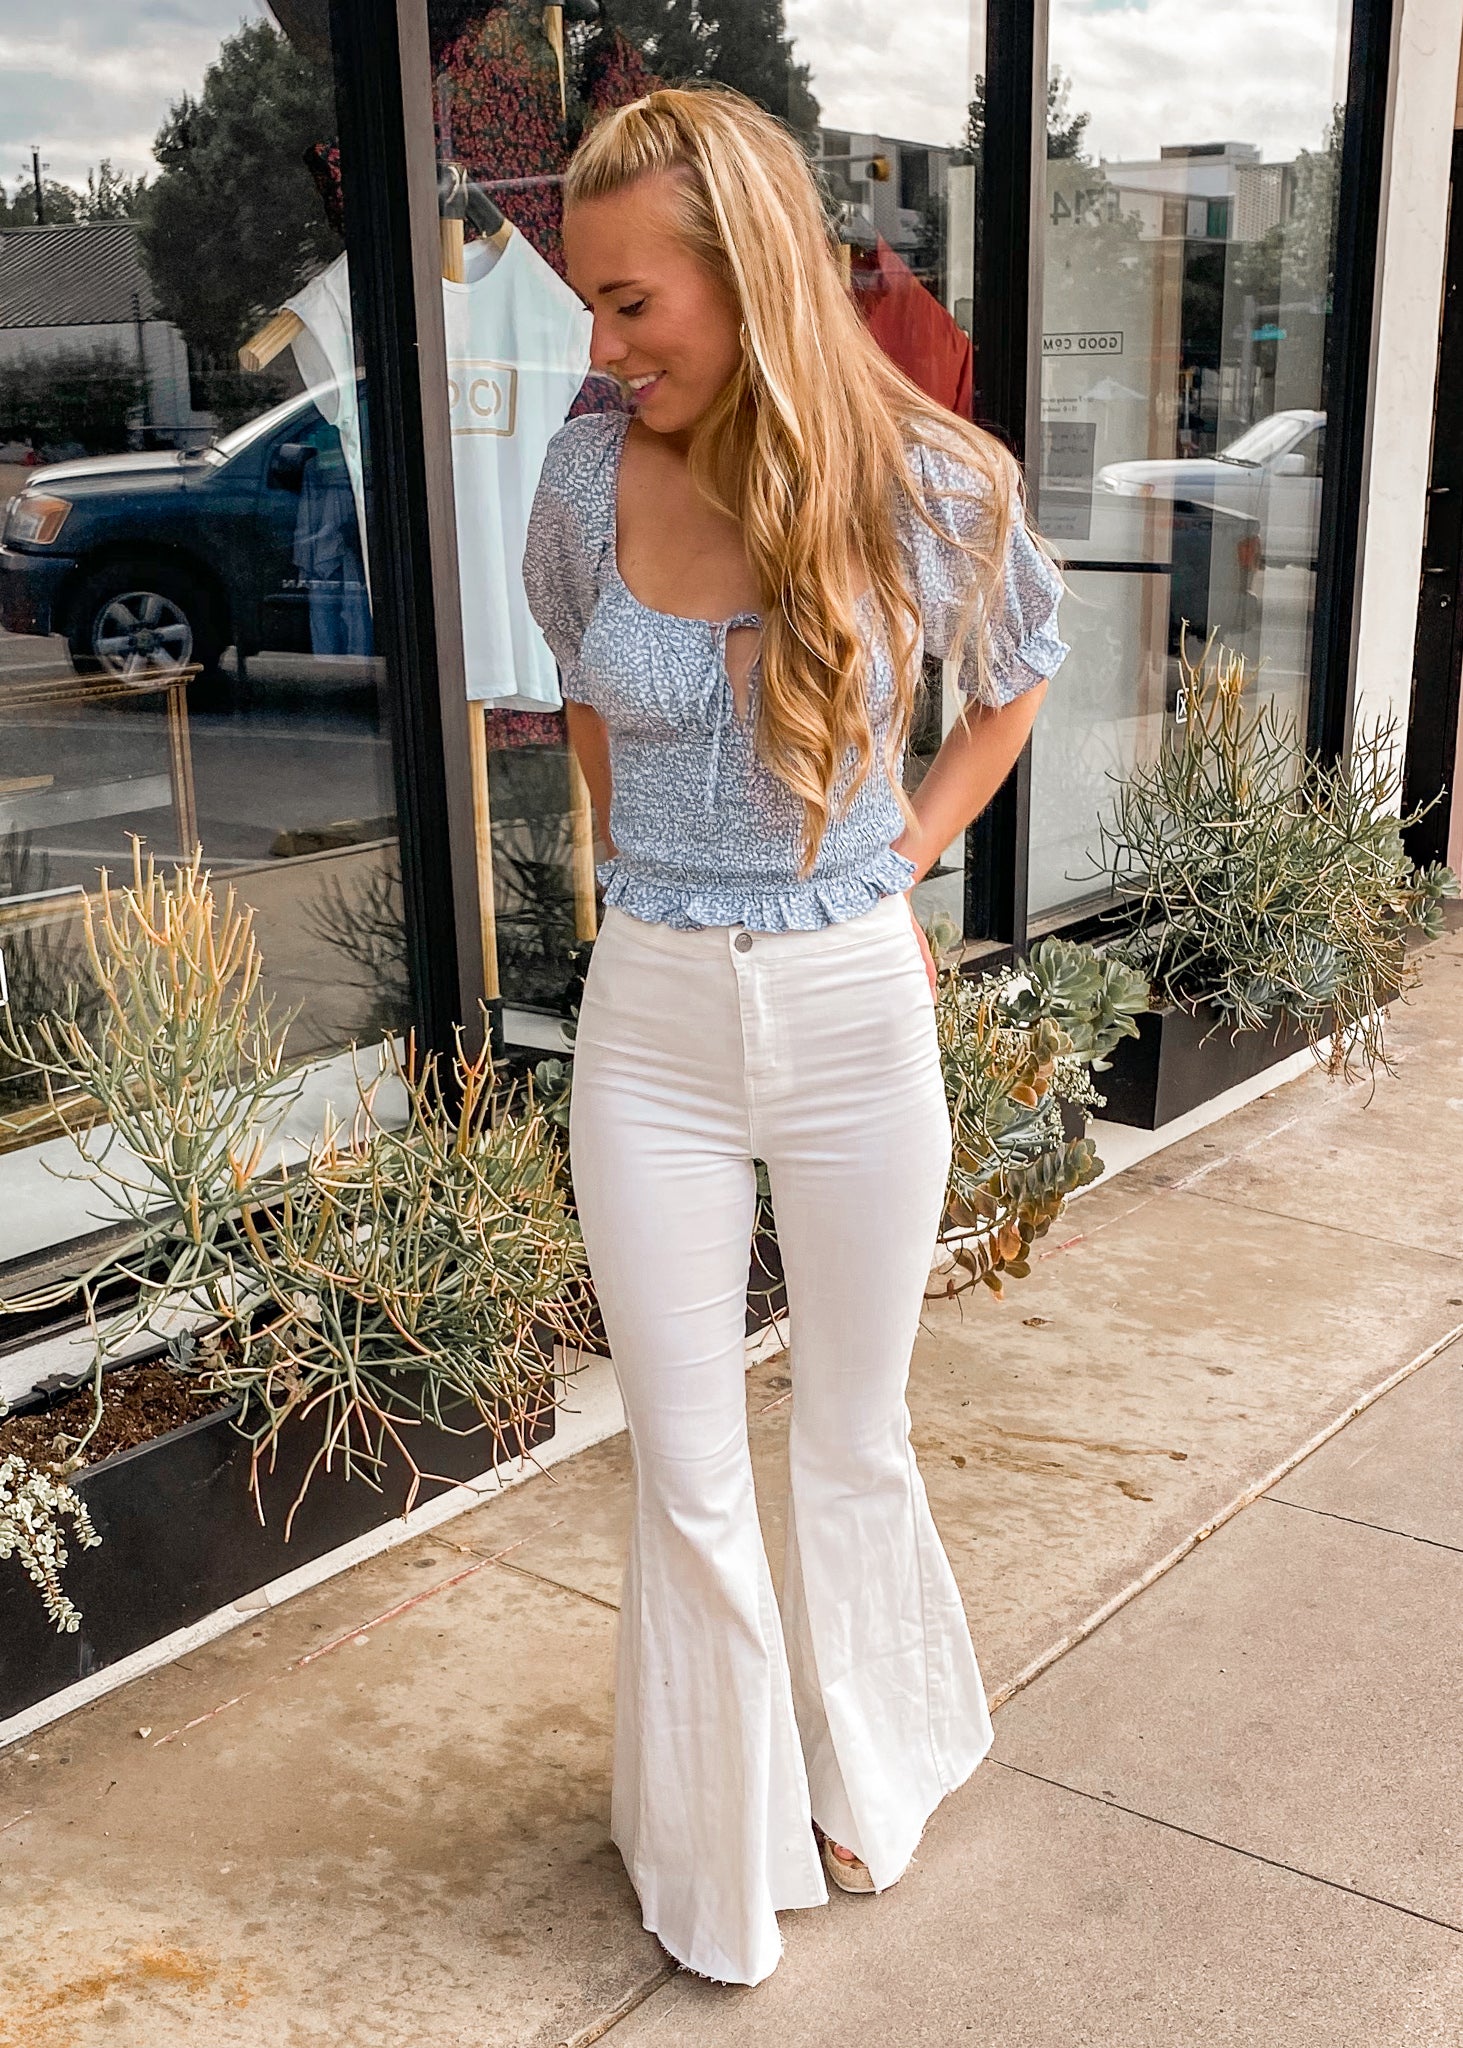 15 Looks With High-Waisted Flare Pants - Styleoholic